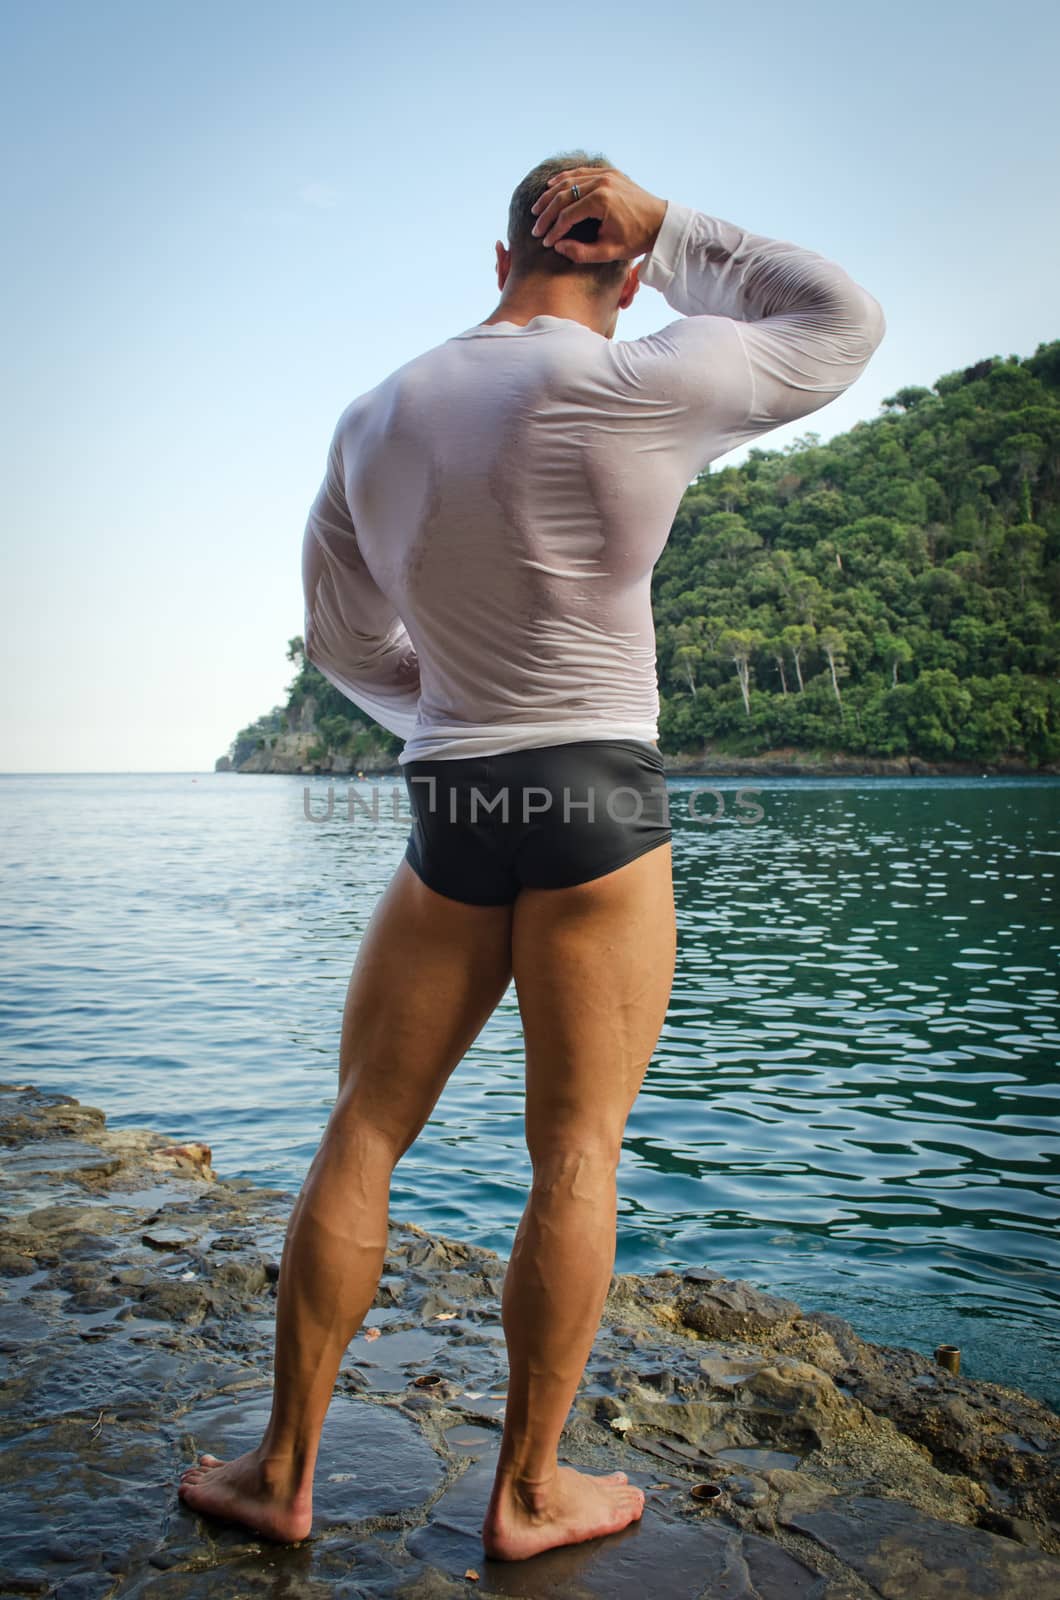 Muscular bodybuilder facing the sea, seen from the back wearing wet shirt